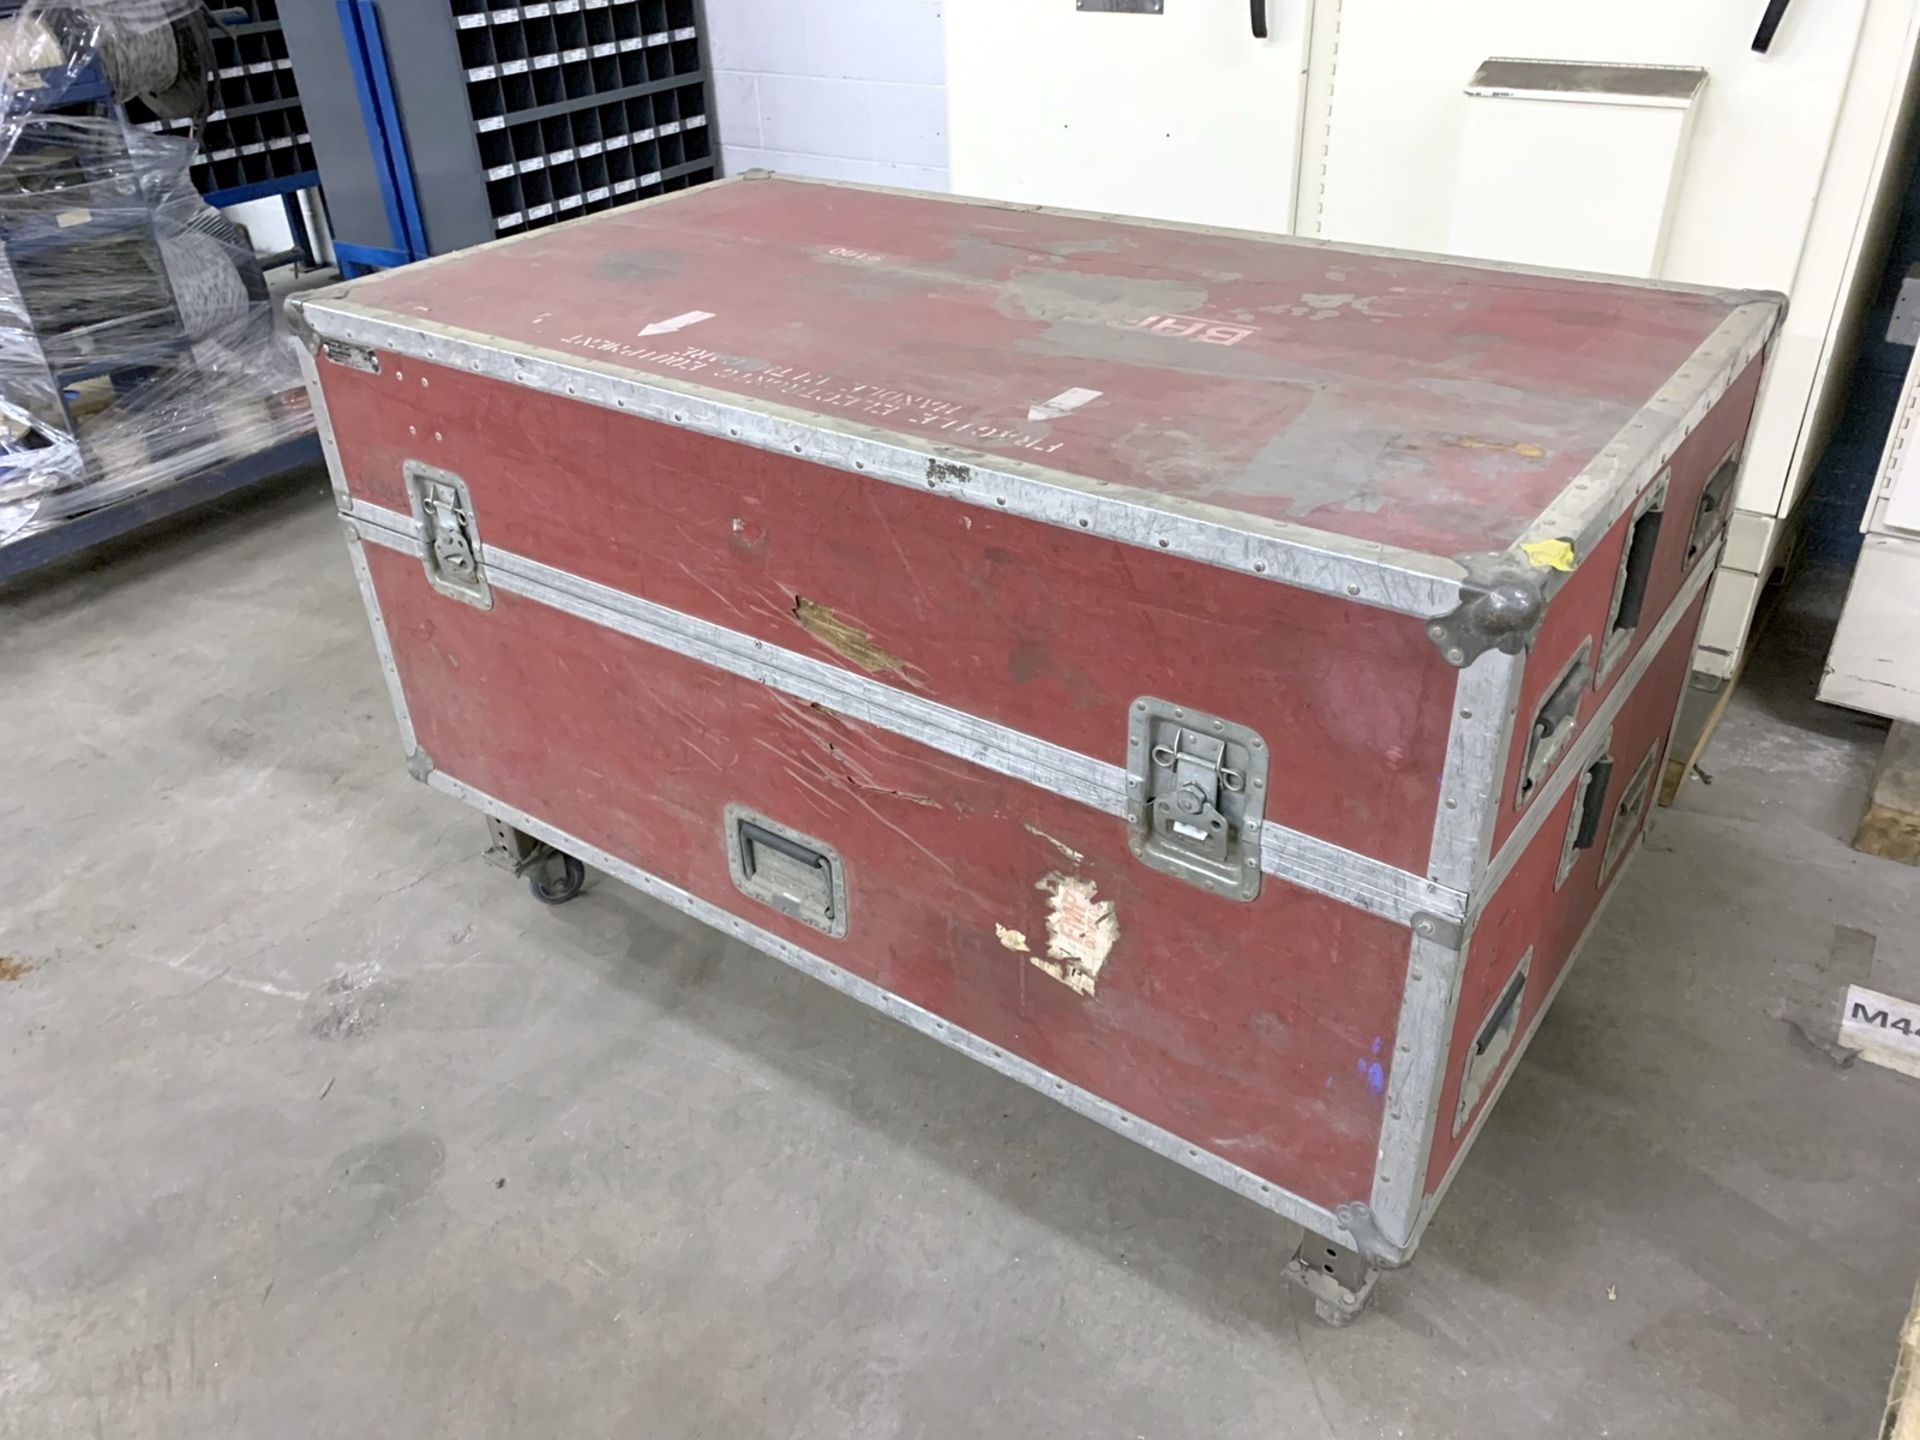 Portable Avil Case full of Various Cables (All Items MUST be Removed by Thursday, December 19, 2019. - Image 4 of 5